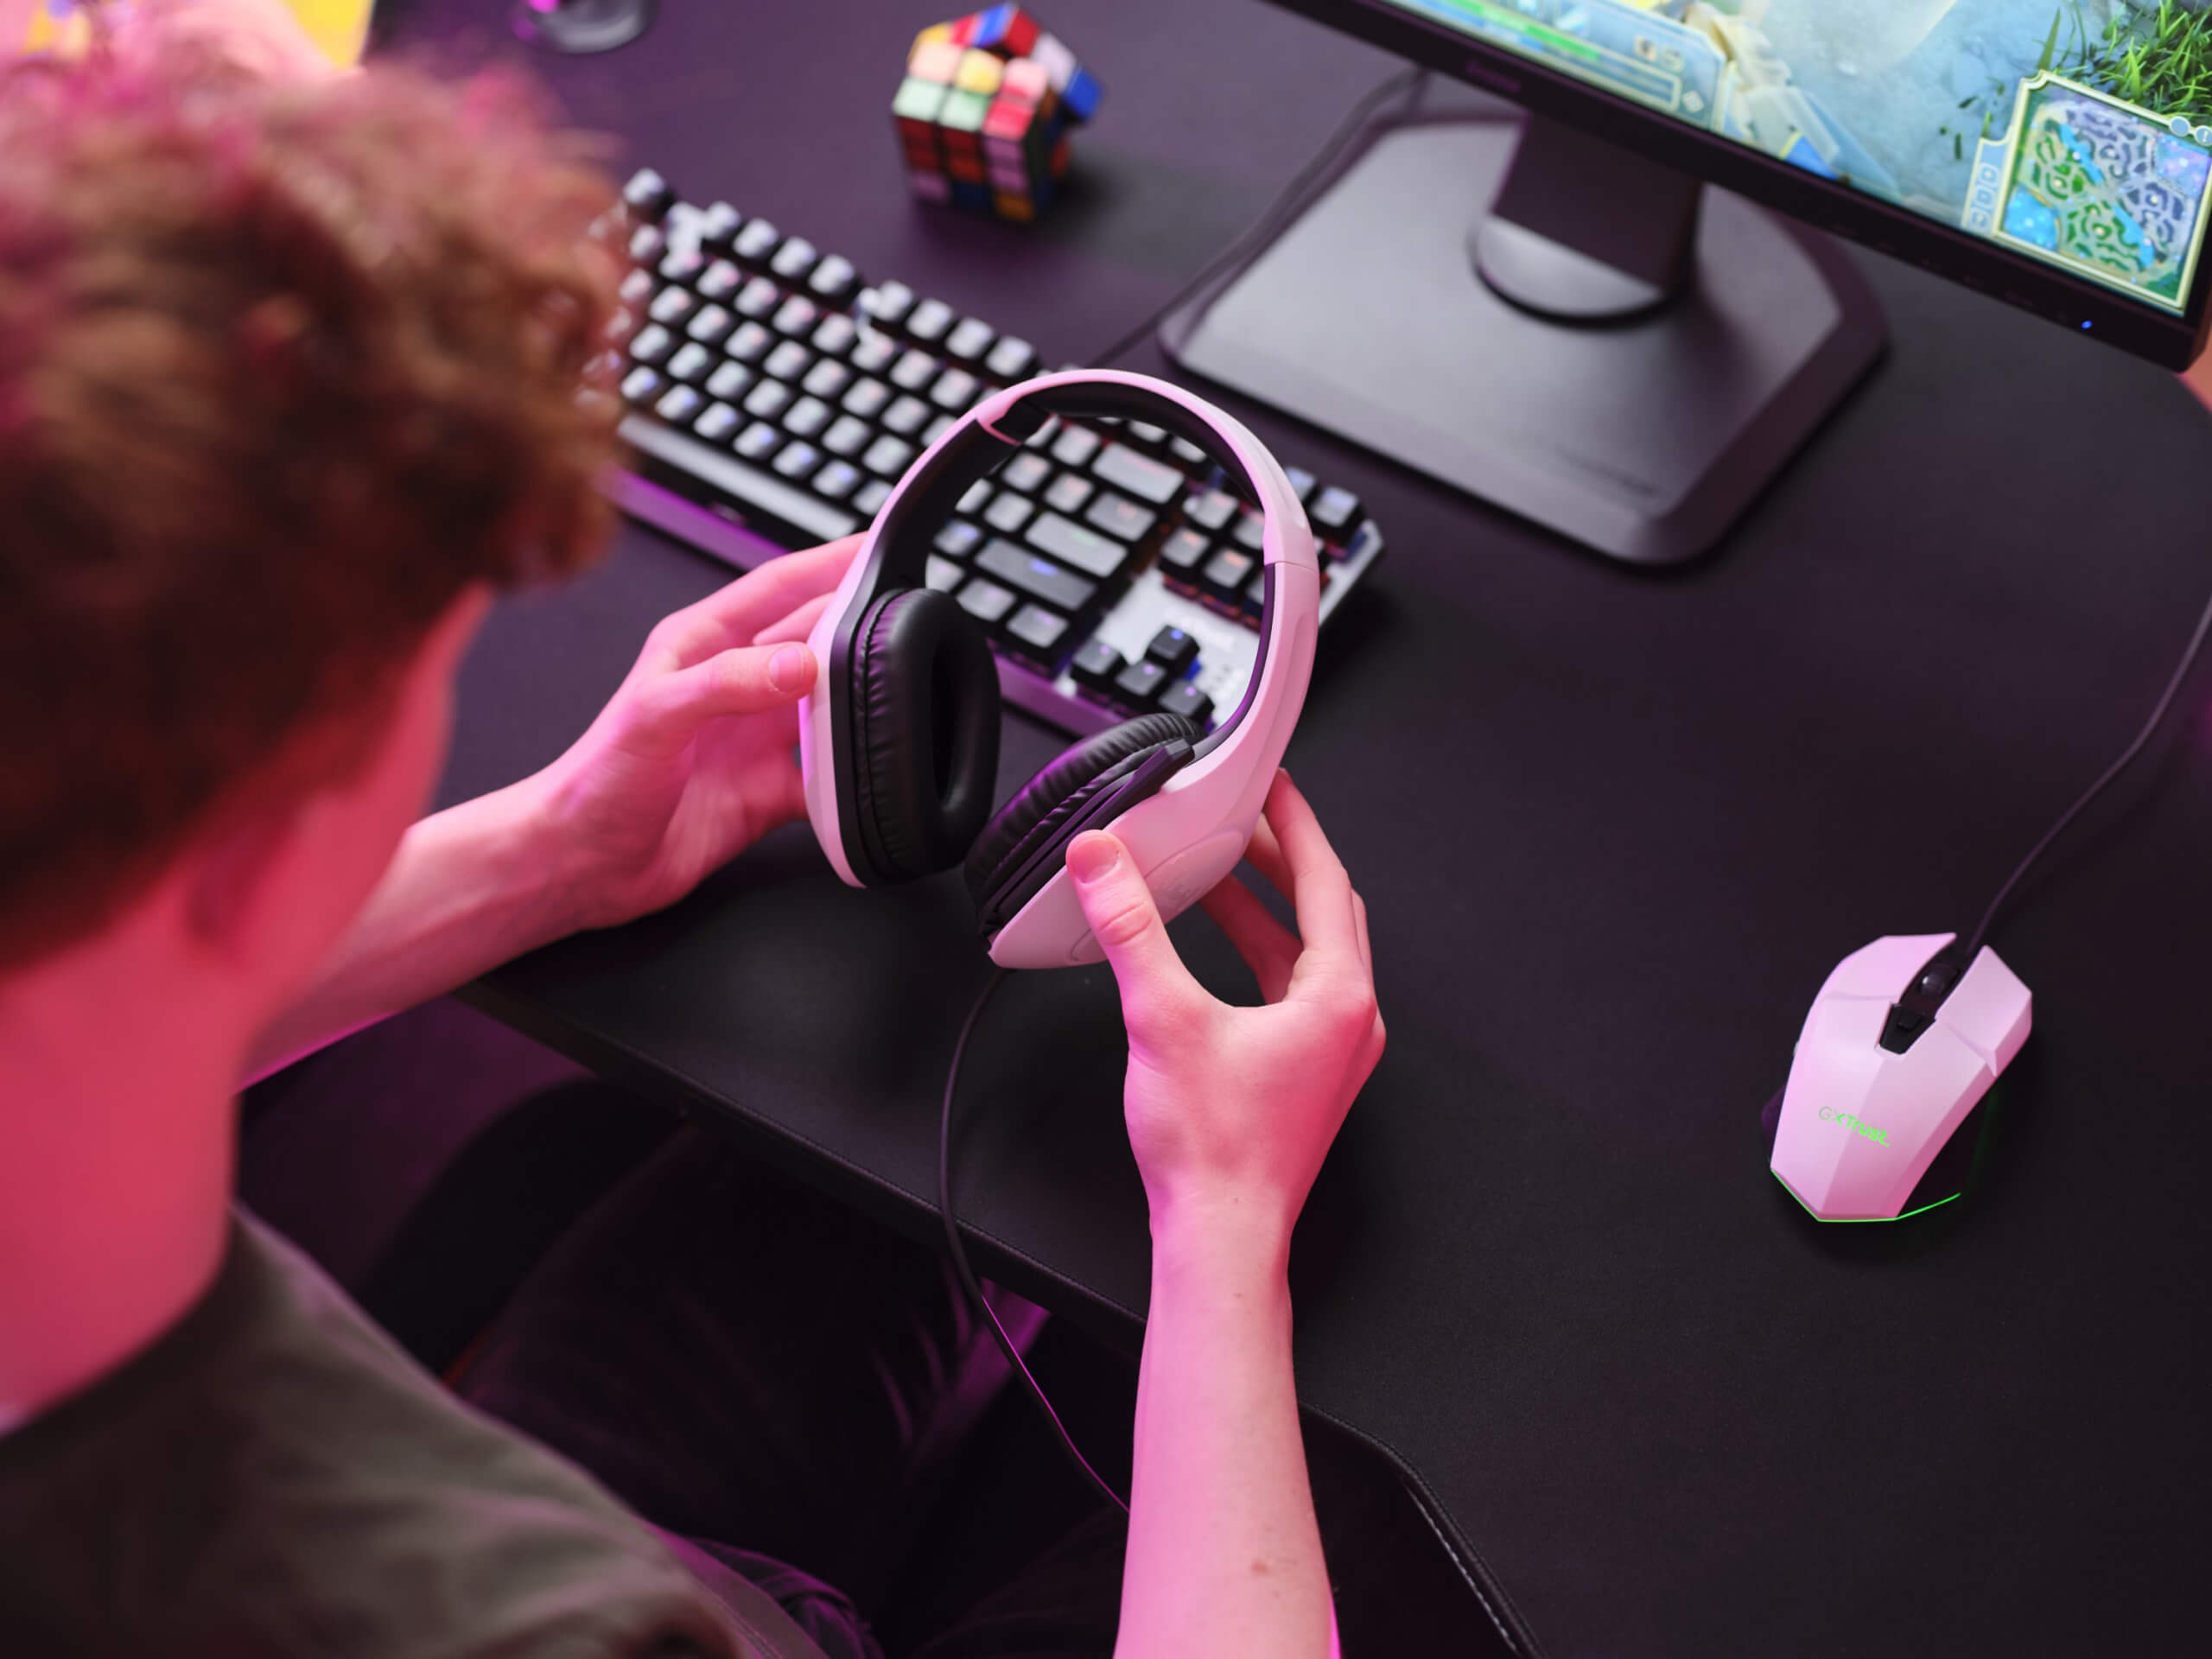 a headset being held in the hands of a gamer at a desk. With rubiks cube, keyboard and mouse on screen